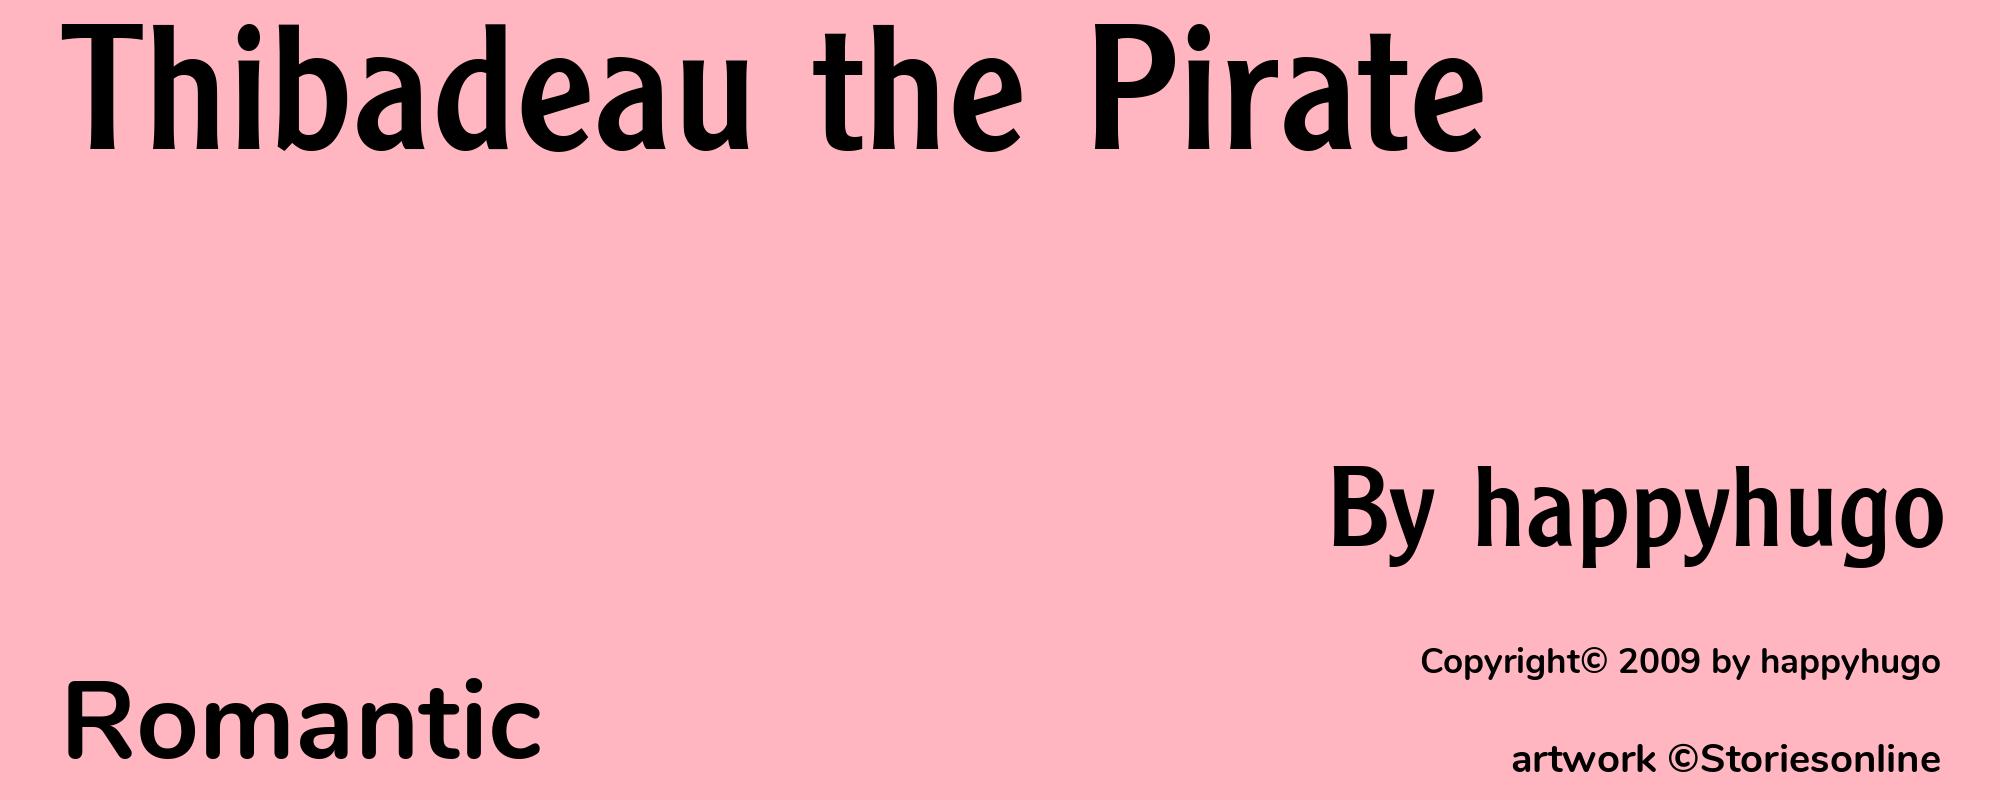 Thibadeau the Pirate - Cover